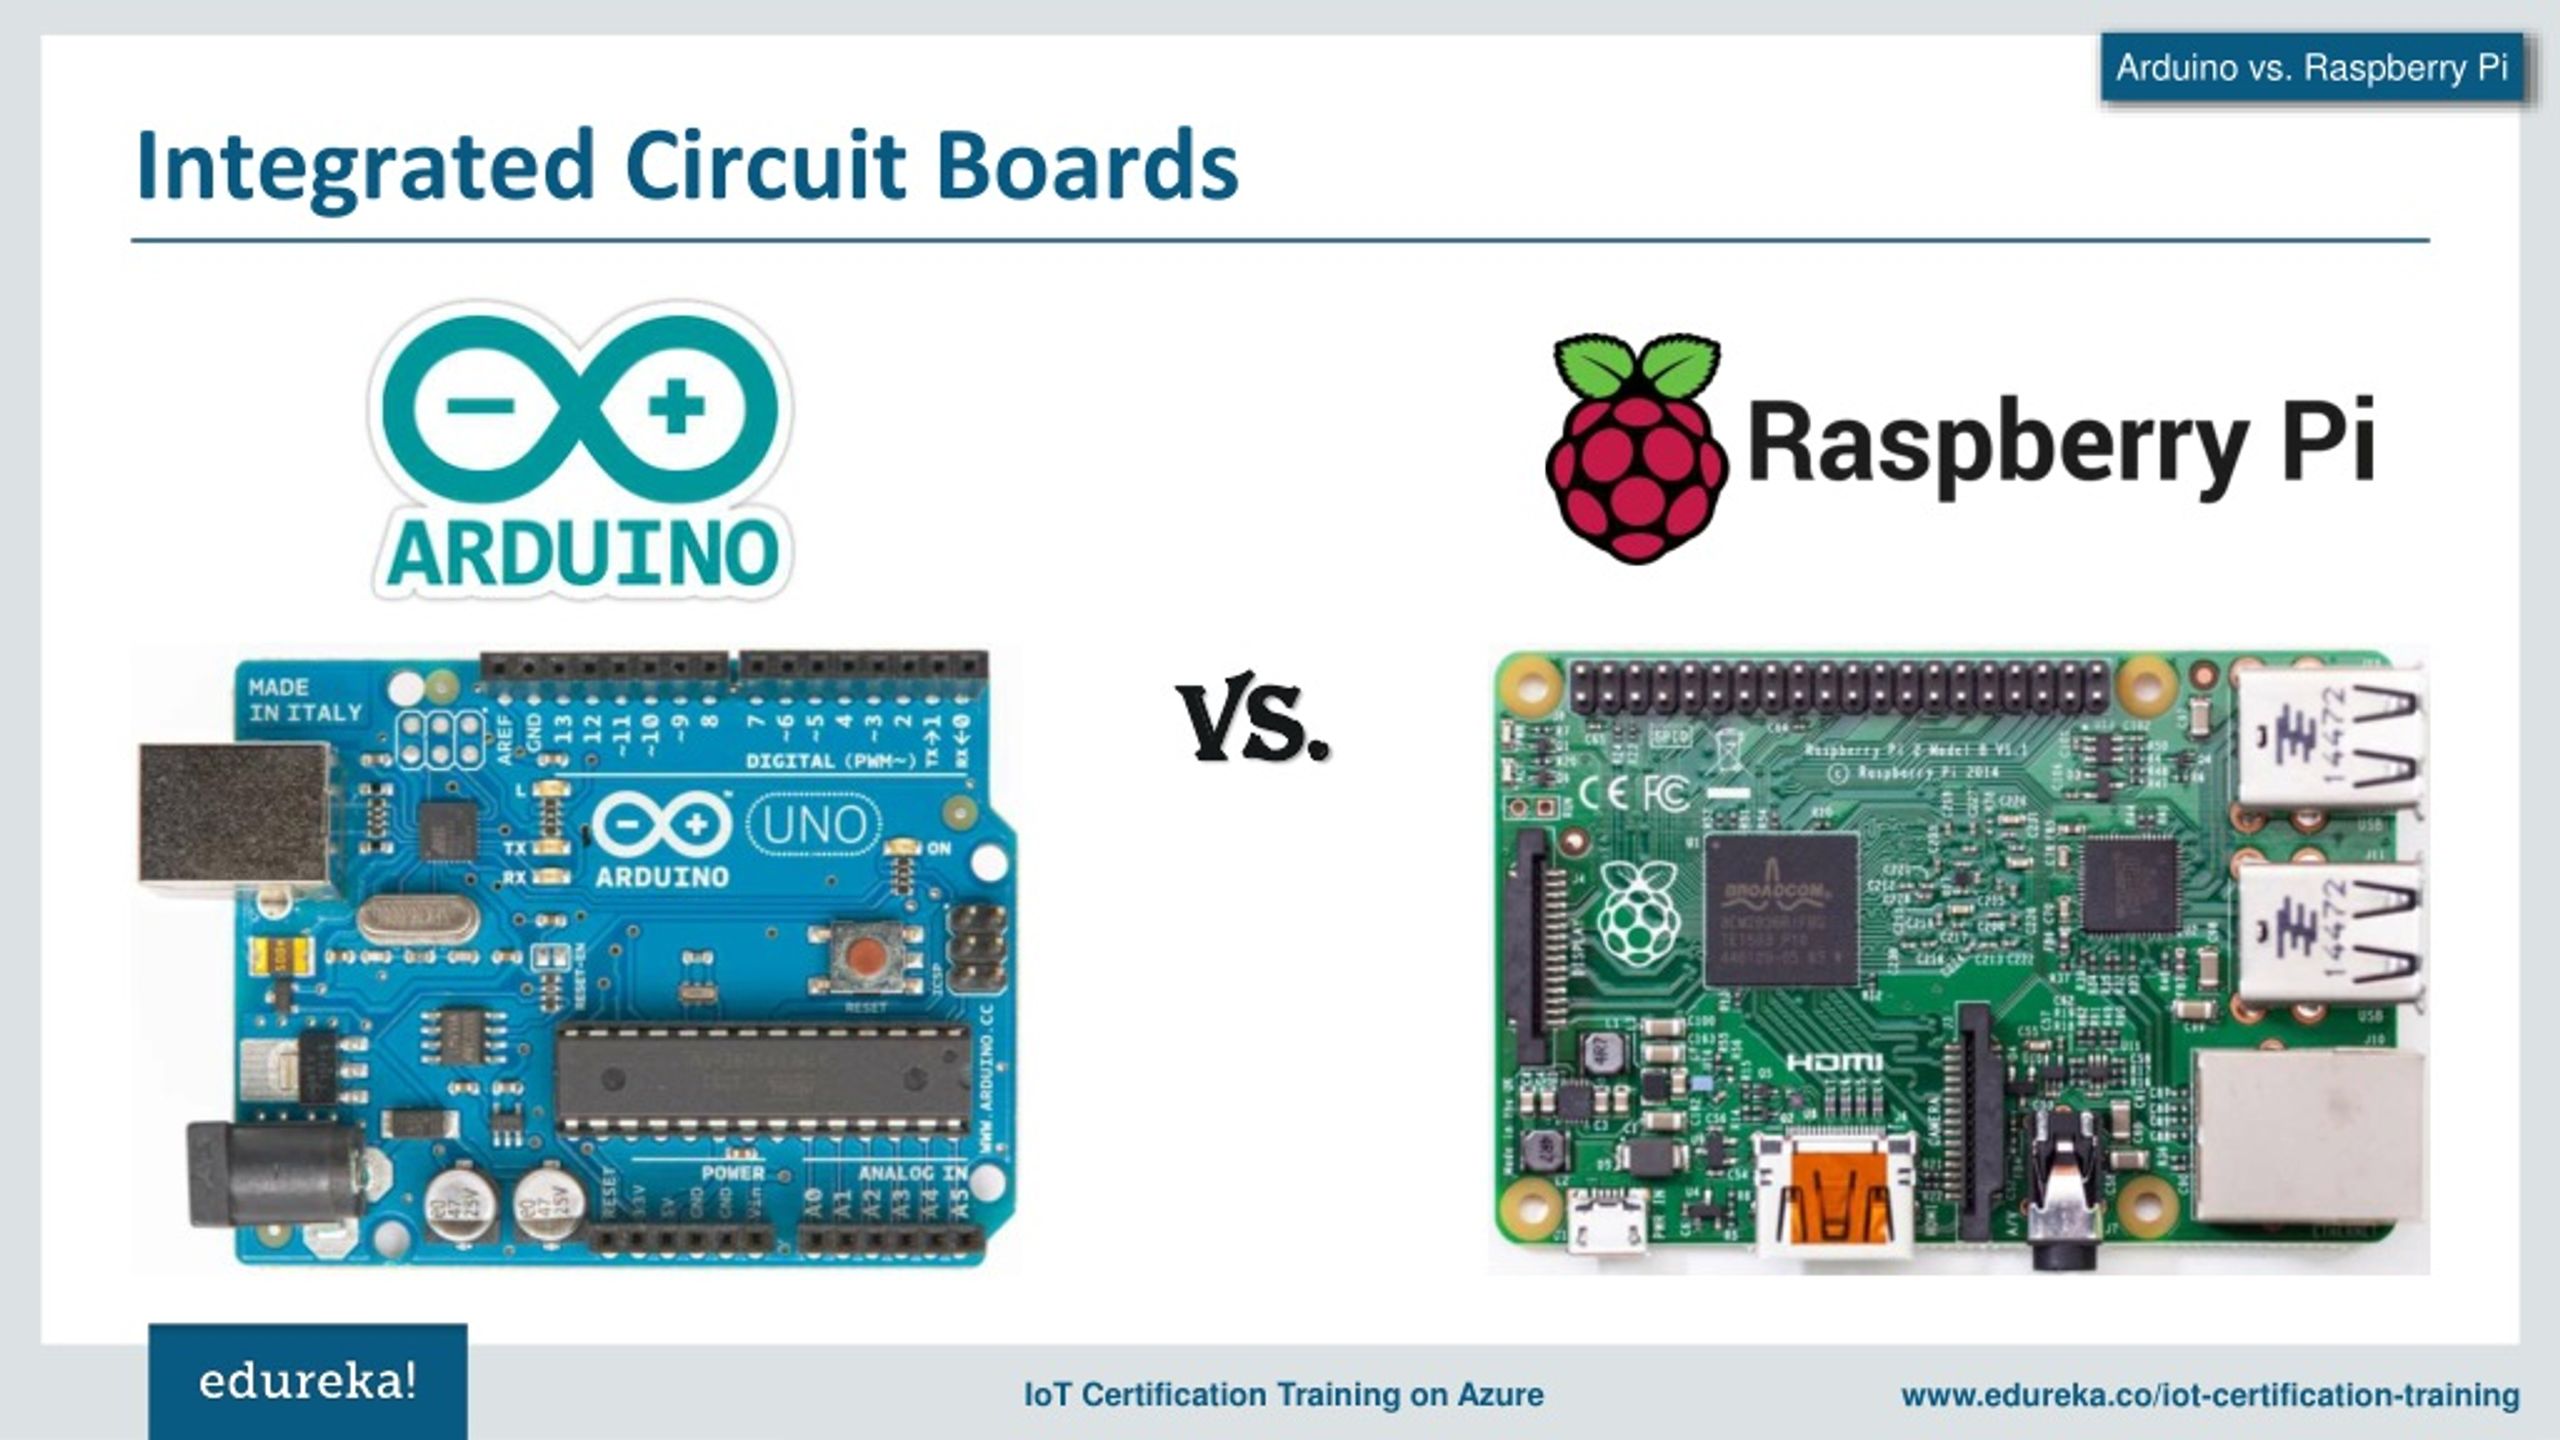 Ppt Arduino Vs Raspberry Pi Which Board To Choose For Iot Projects Iot Devices Edureka 8699